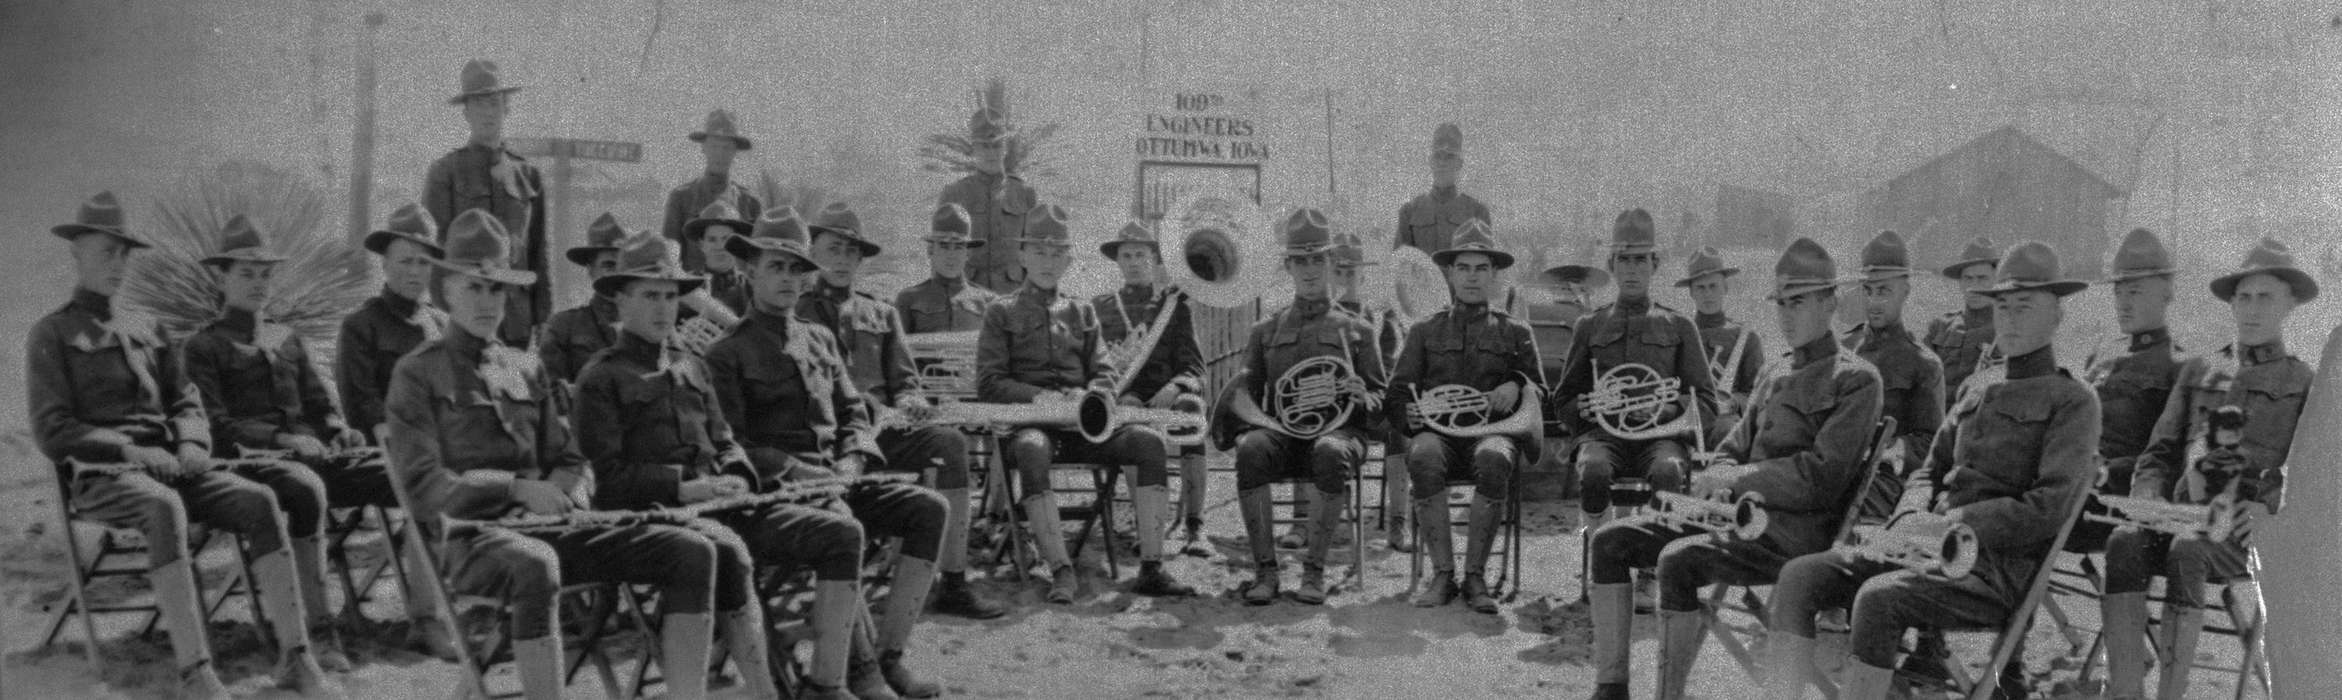 Military and Veterans, military, band, trumpet, french horn, USA, Iowa History, Portraits - Group, Iowa, tuba, history of Iowa, flute, Lemberger, LeAnn